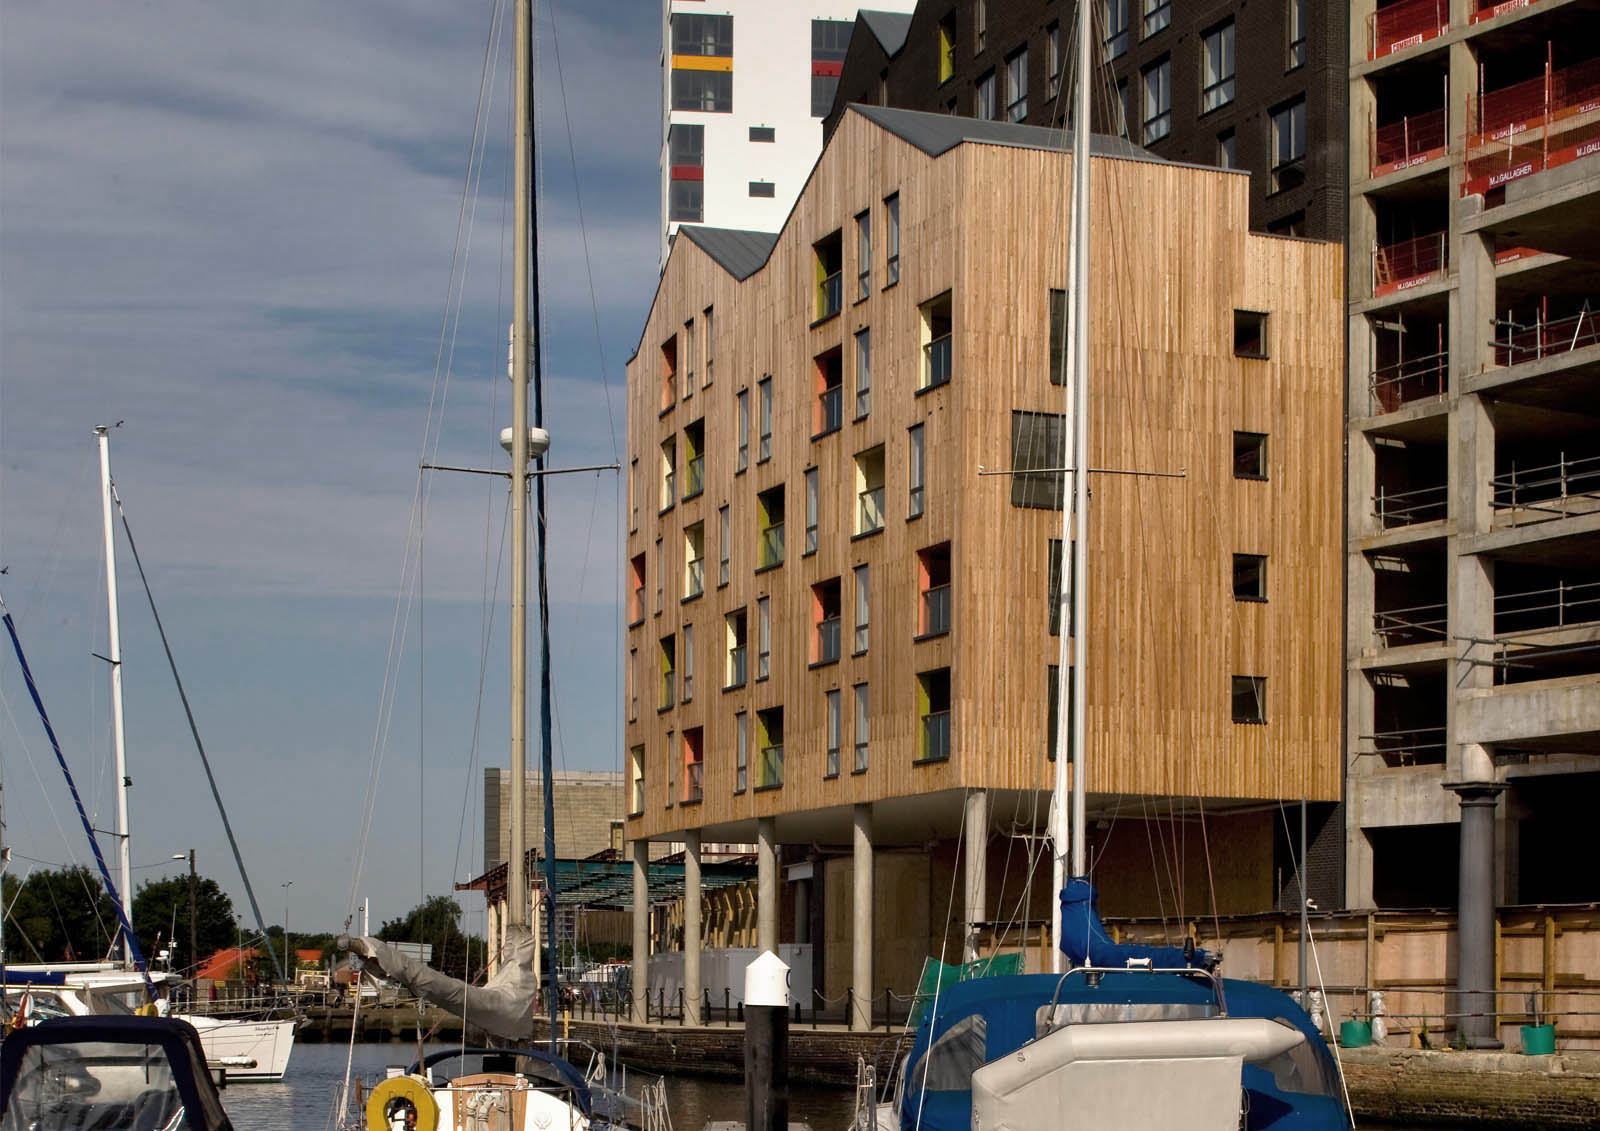 Mixed-use waterfront development, timber clad housing